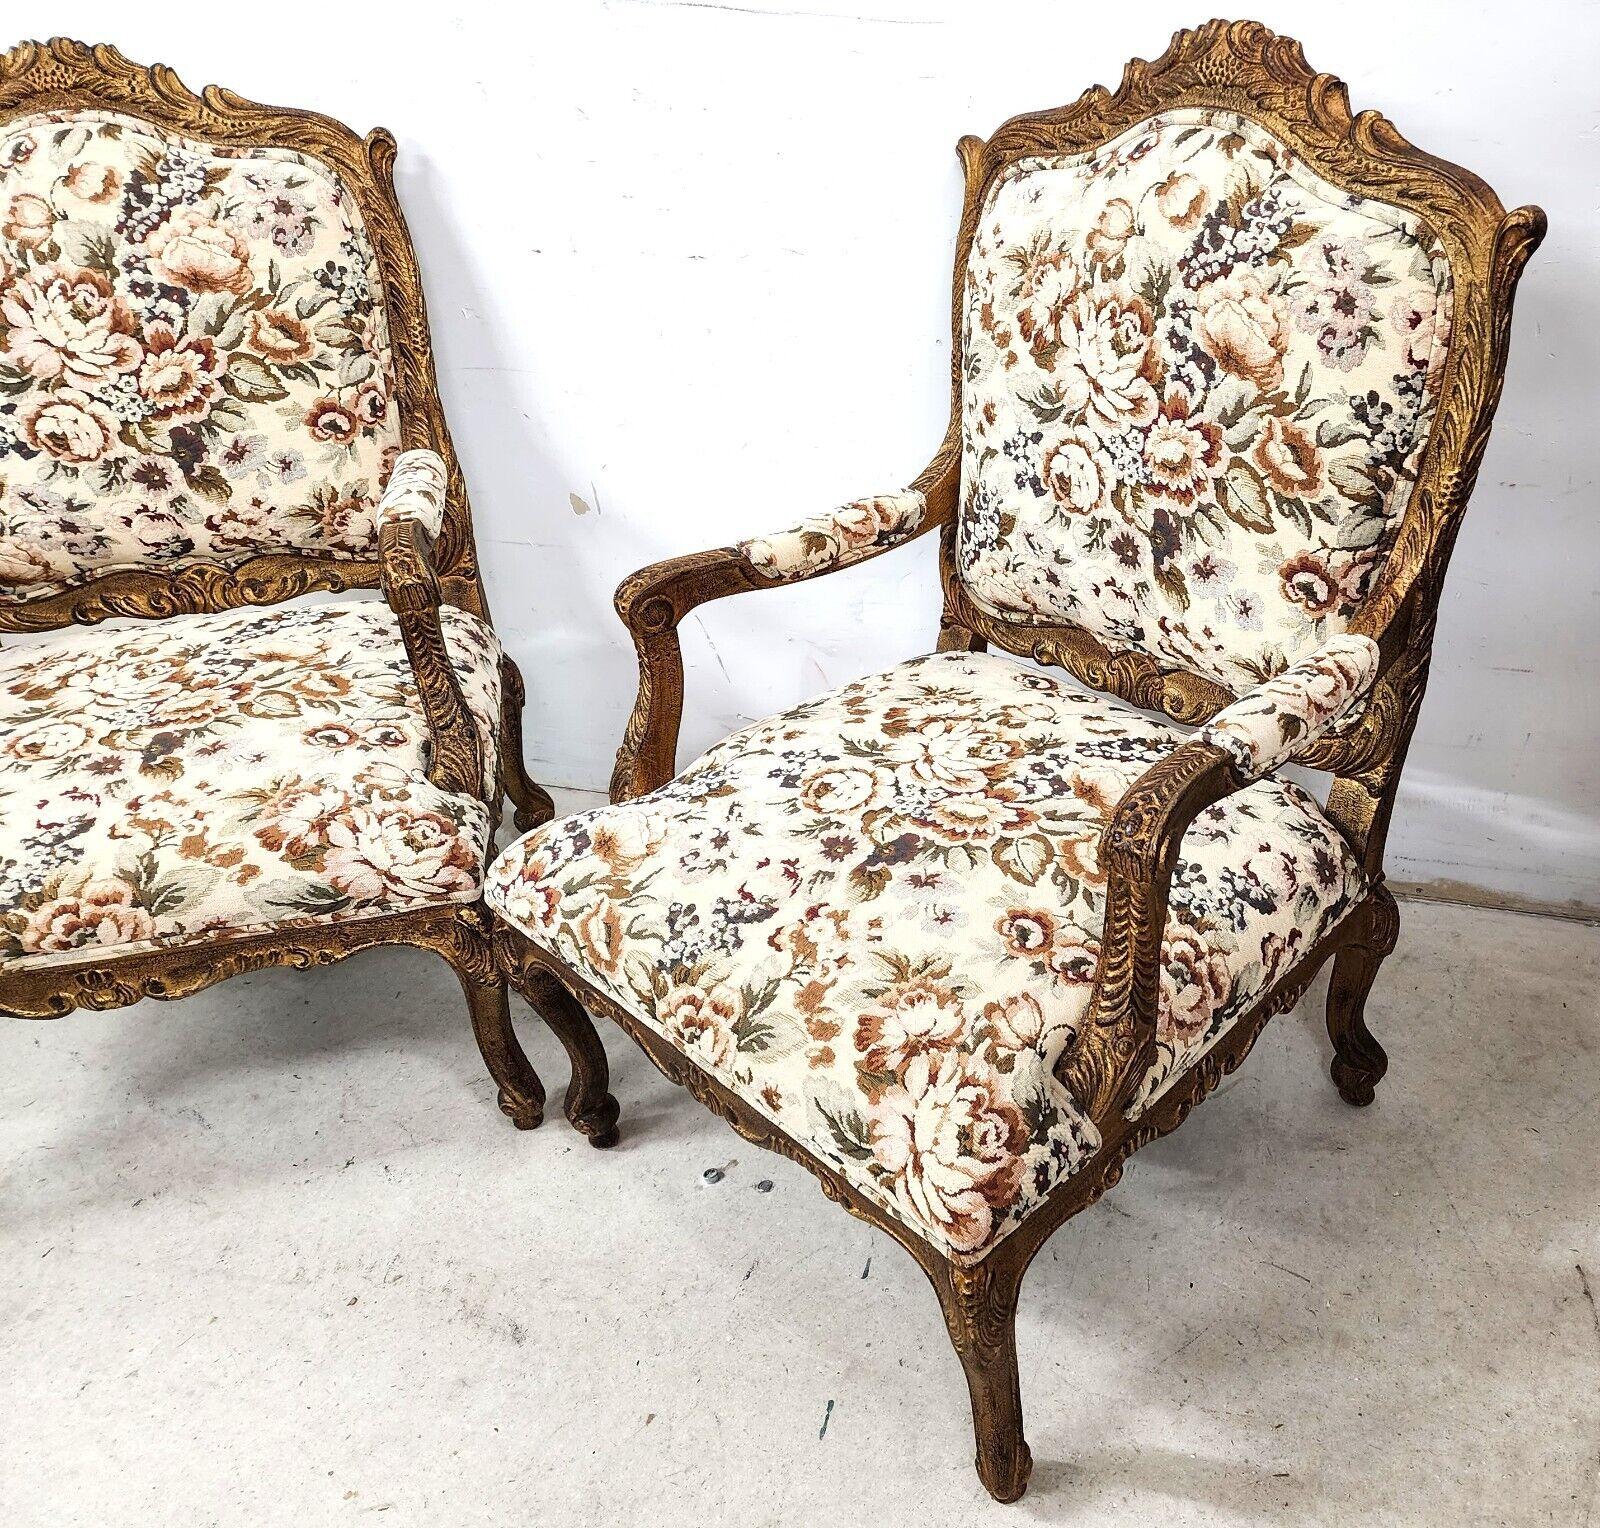 For FULL item description click on CONTINUE READING at the bottom of this page.
For a shipping quote, please send us your zip code.

Offering One Of Our Recent Palm Beach Estate Fine Furniture Acquisitions Of A 
Pair of French Louis XV Style